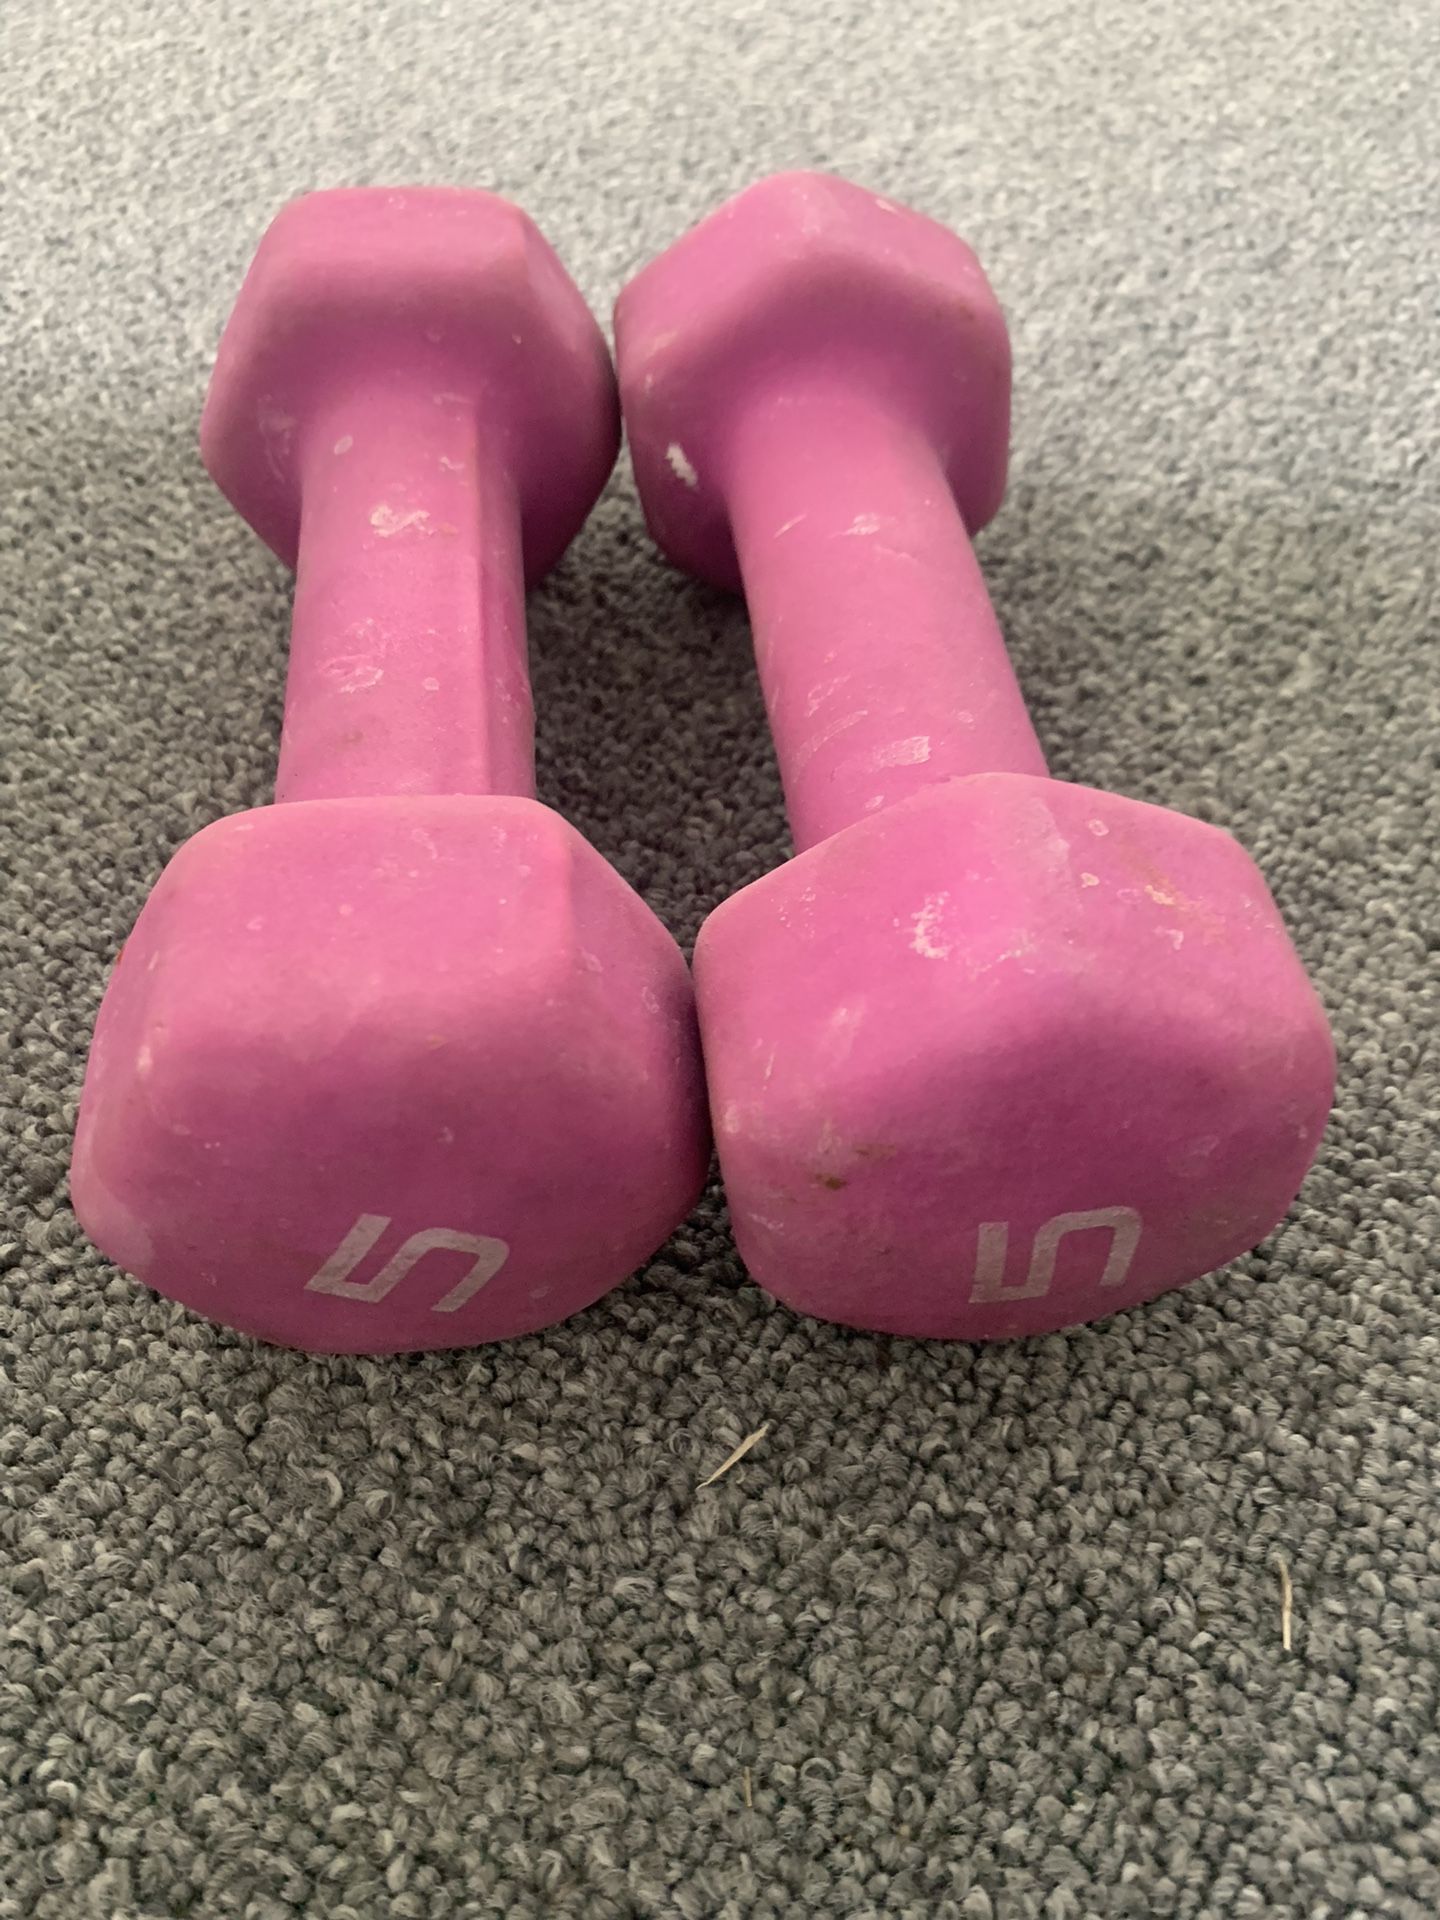 5lb Weights 